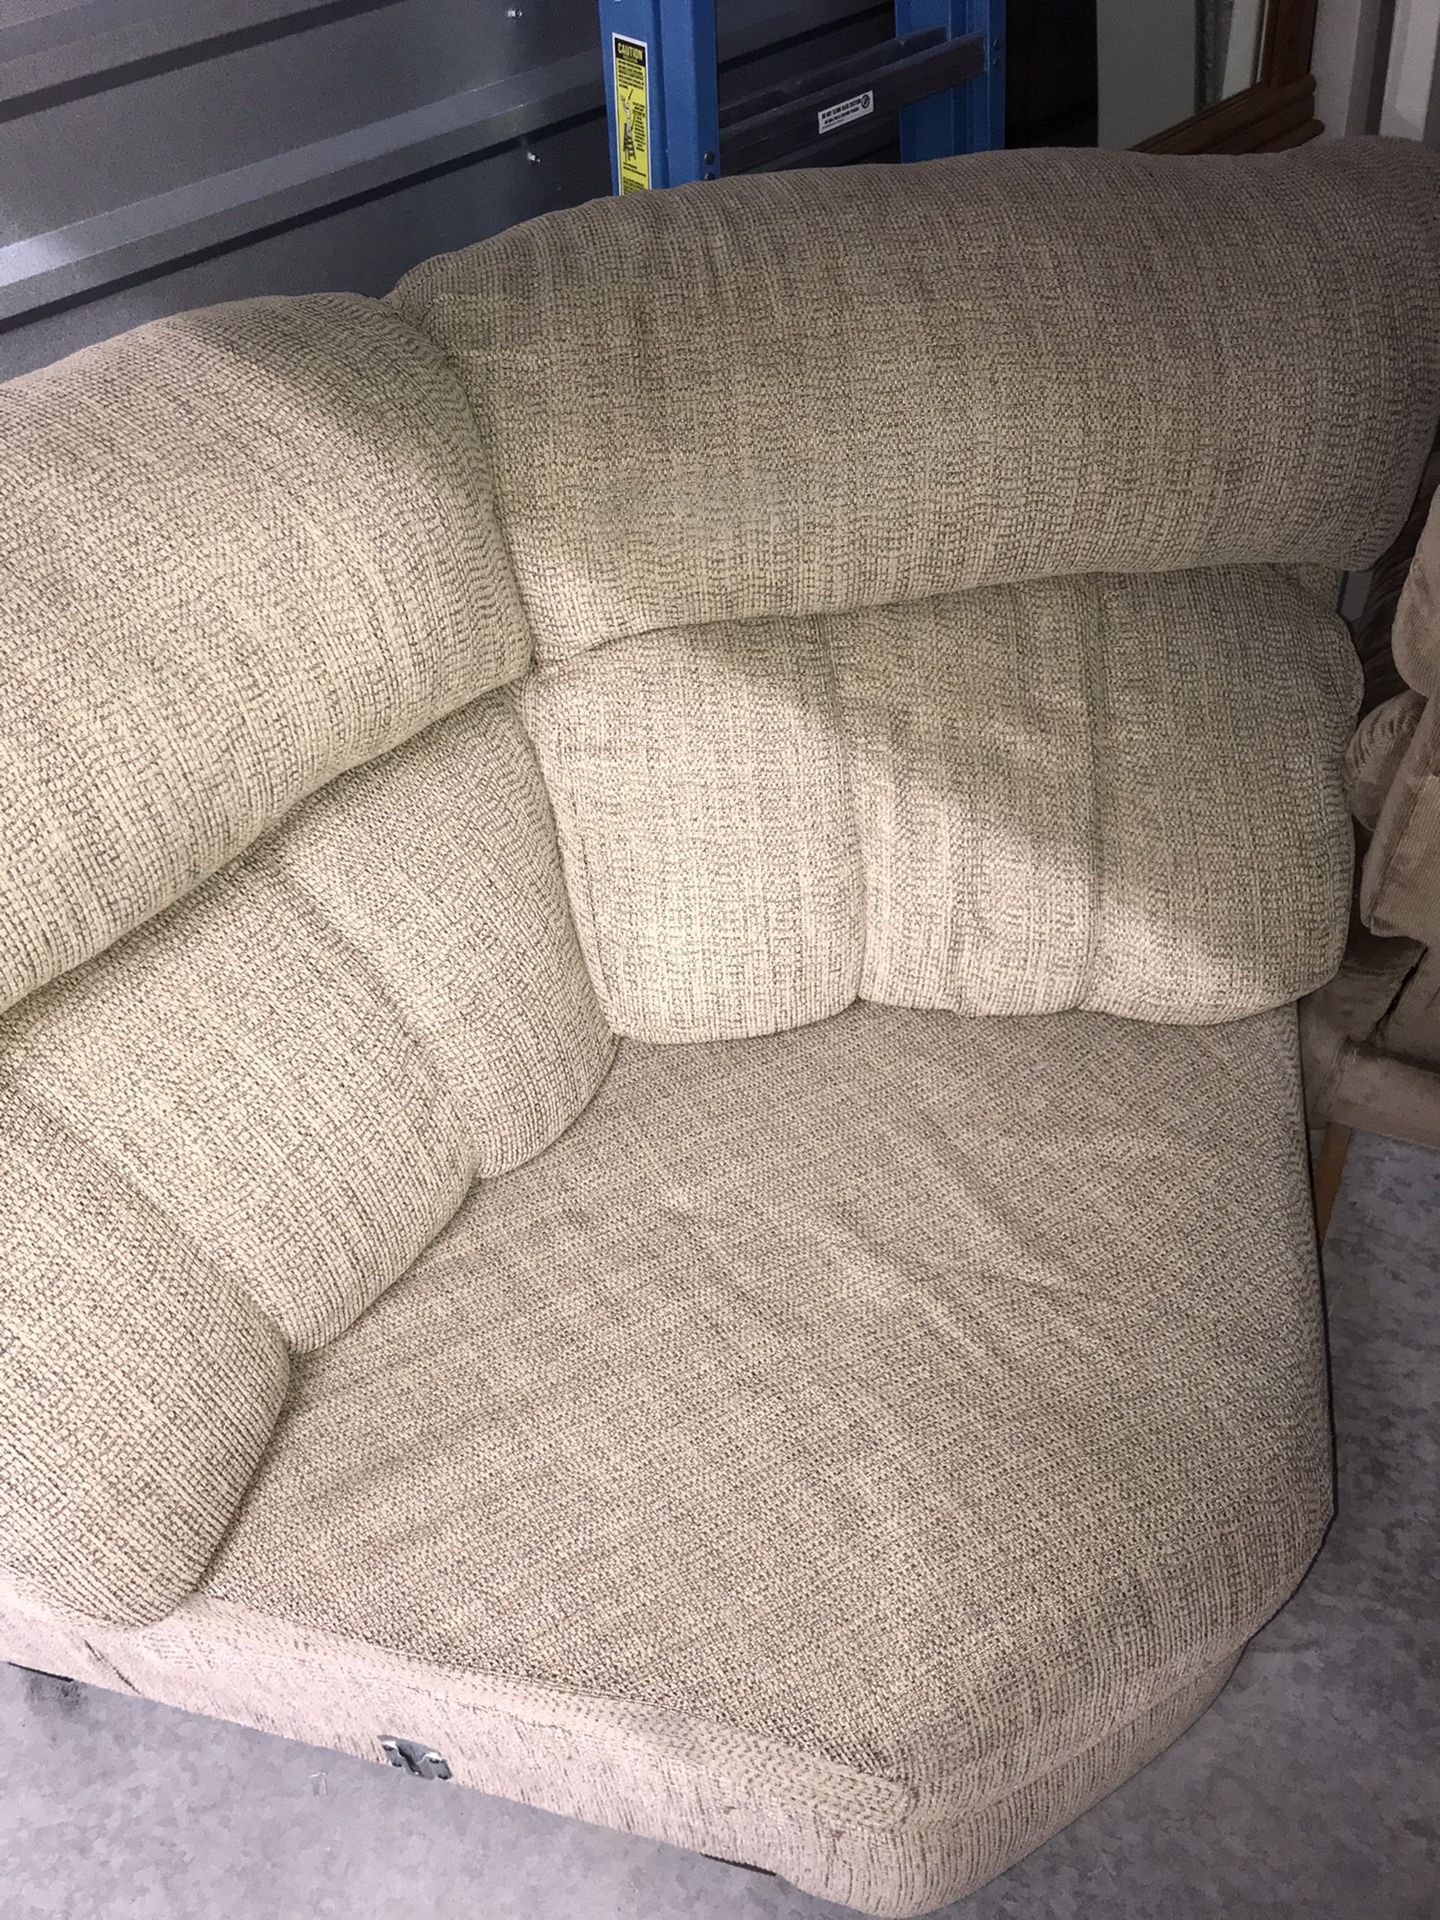 Used Sectional Couch